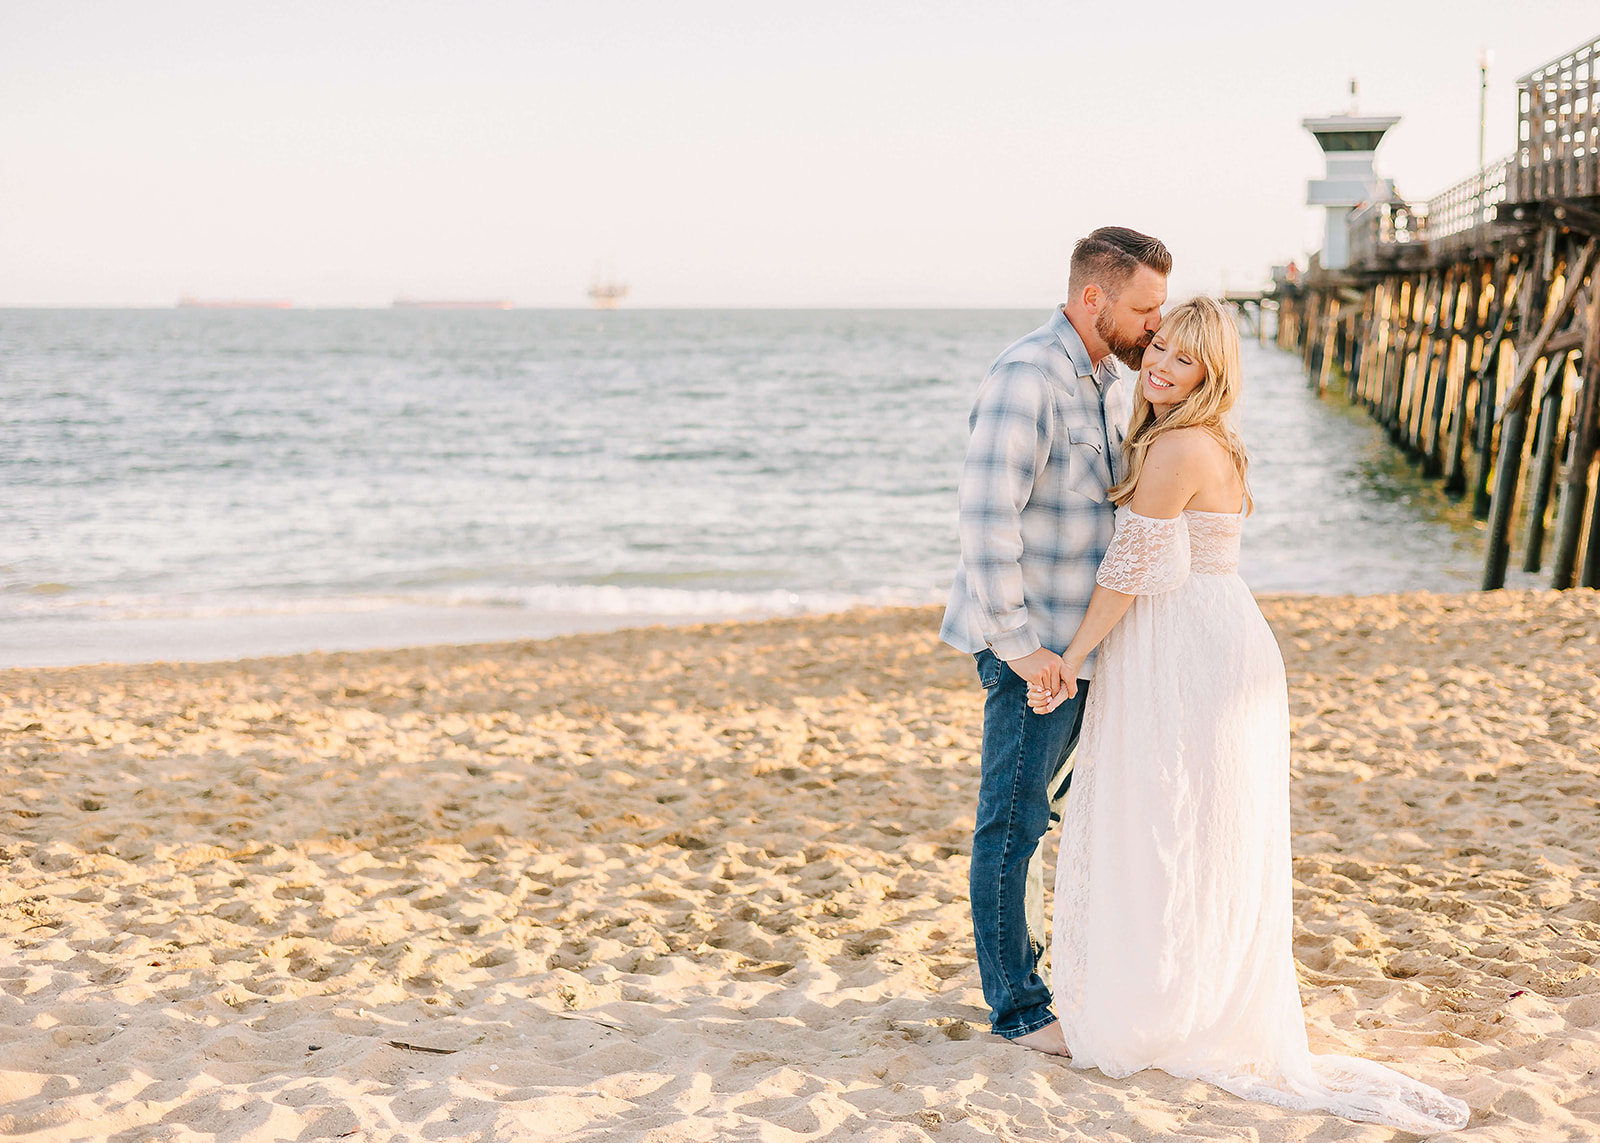 A husband kisses the temple of his pregnant wife on the beach wearing a white lace maternity gown Los Angeles Pediatricians